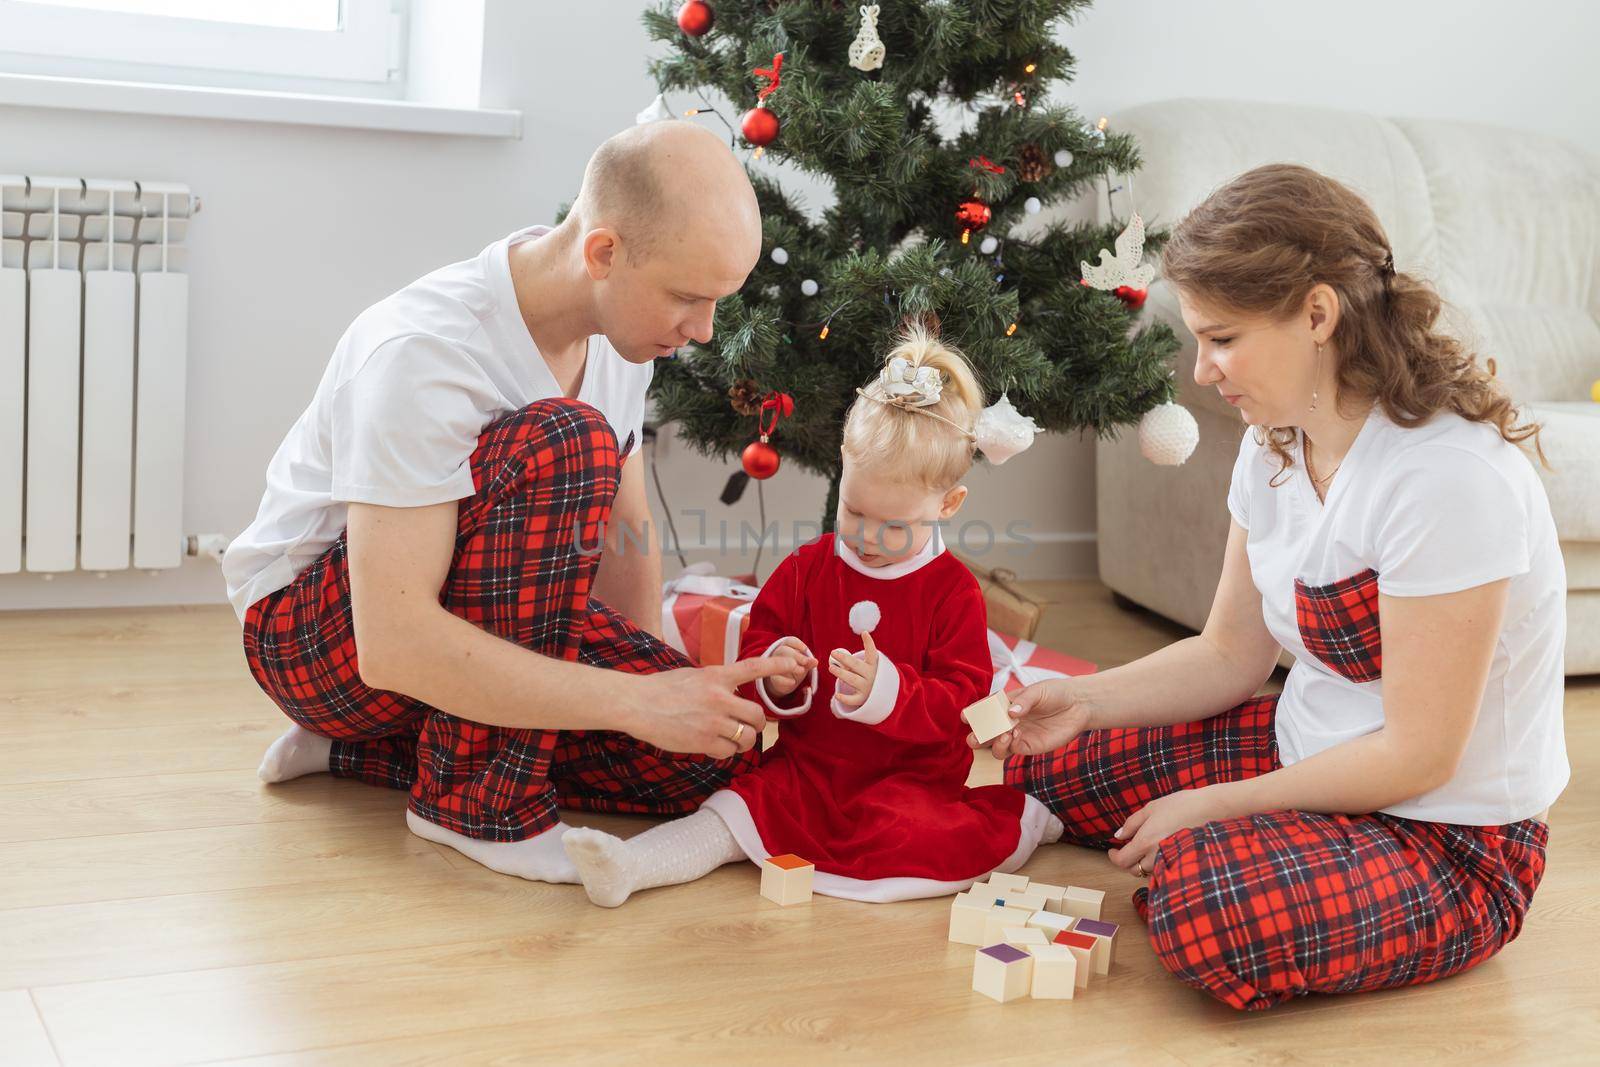 Toddler child with cochlear implant plays with parents under christmas tree - deafness and innovating medical technologies for hearing aid and diversity by Satura86